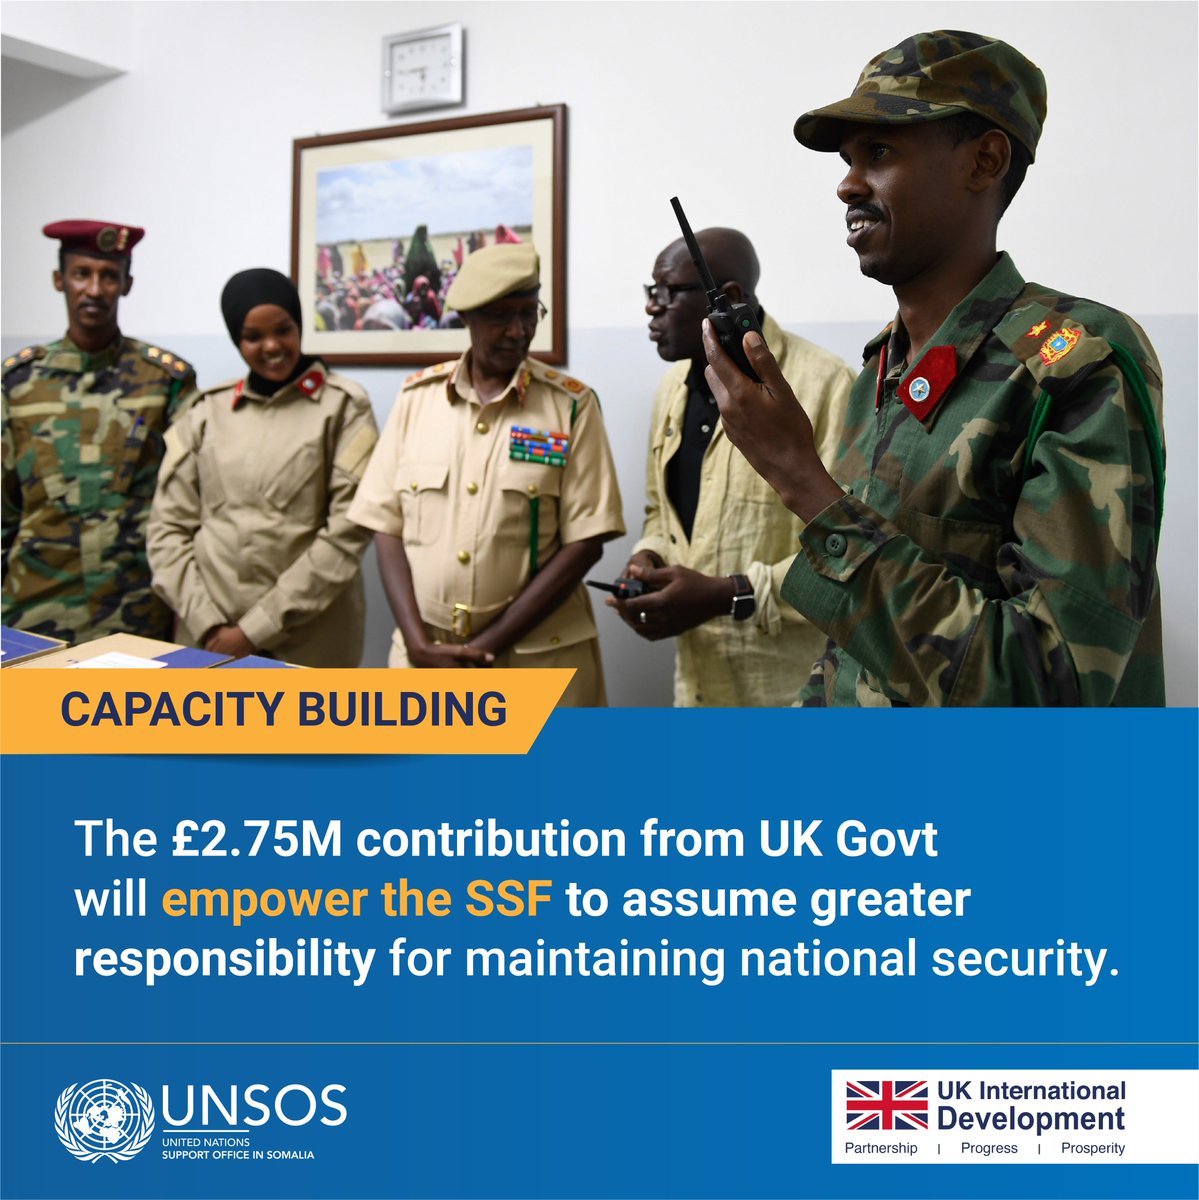 The £2.75M contribution from 🇬🇧 will also improve #Somali security personnel's ability and expertise to operate and maintain Very High Frequency (VHF) communication equipment crucial in securing the country against terrorist threats. Investing in #SSF promotes long-term peace…